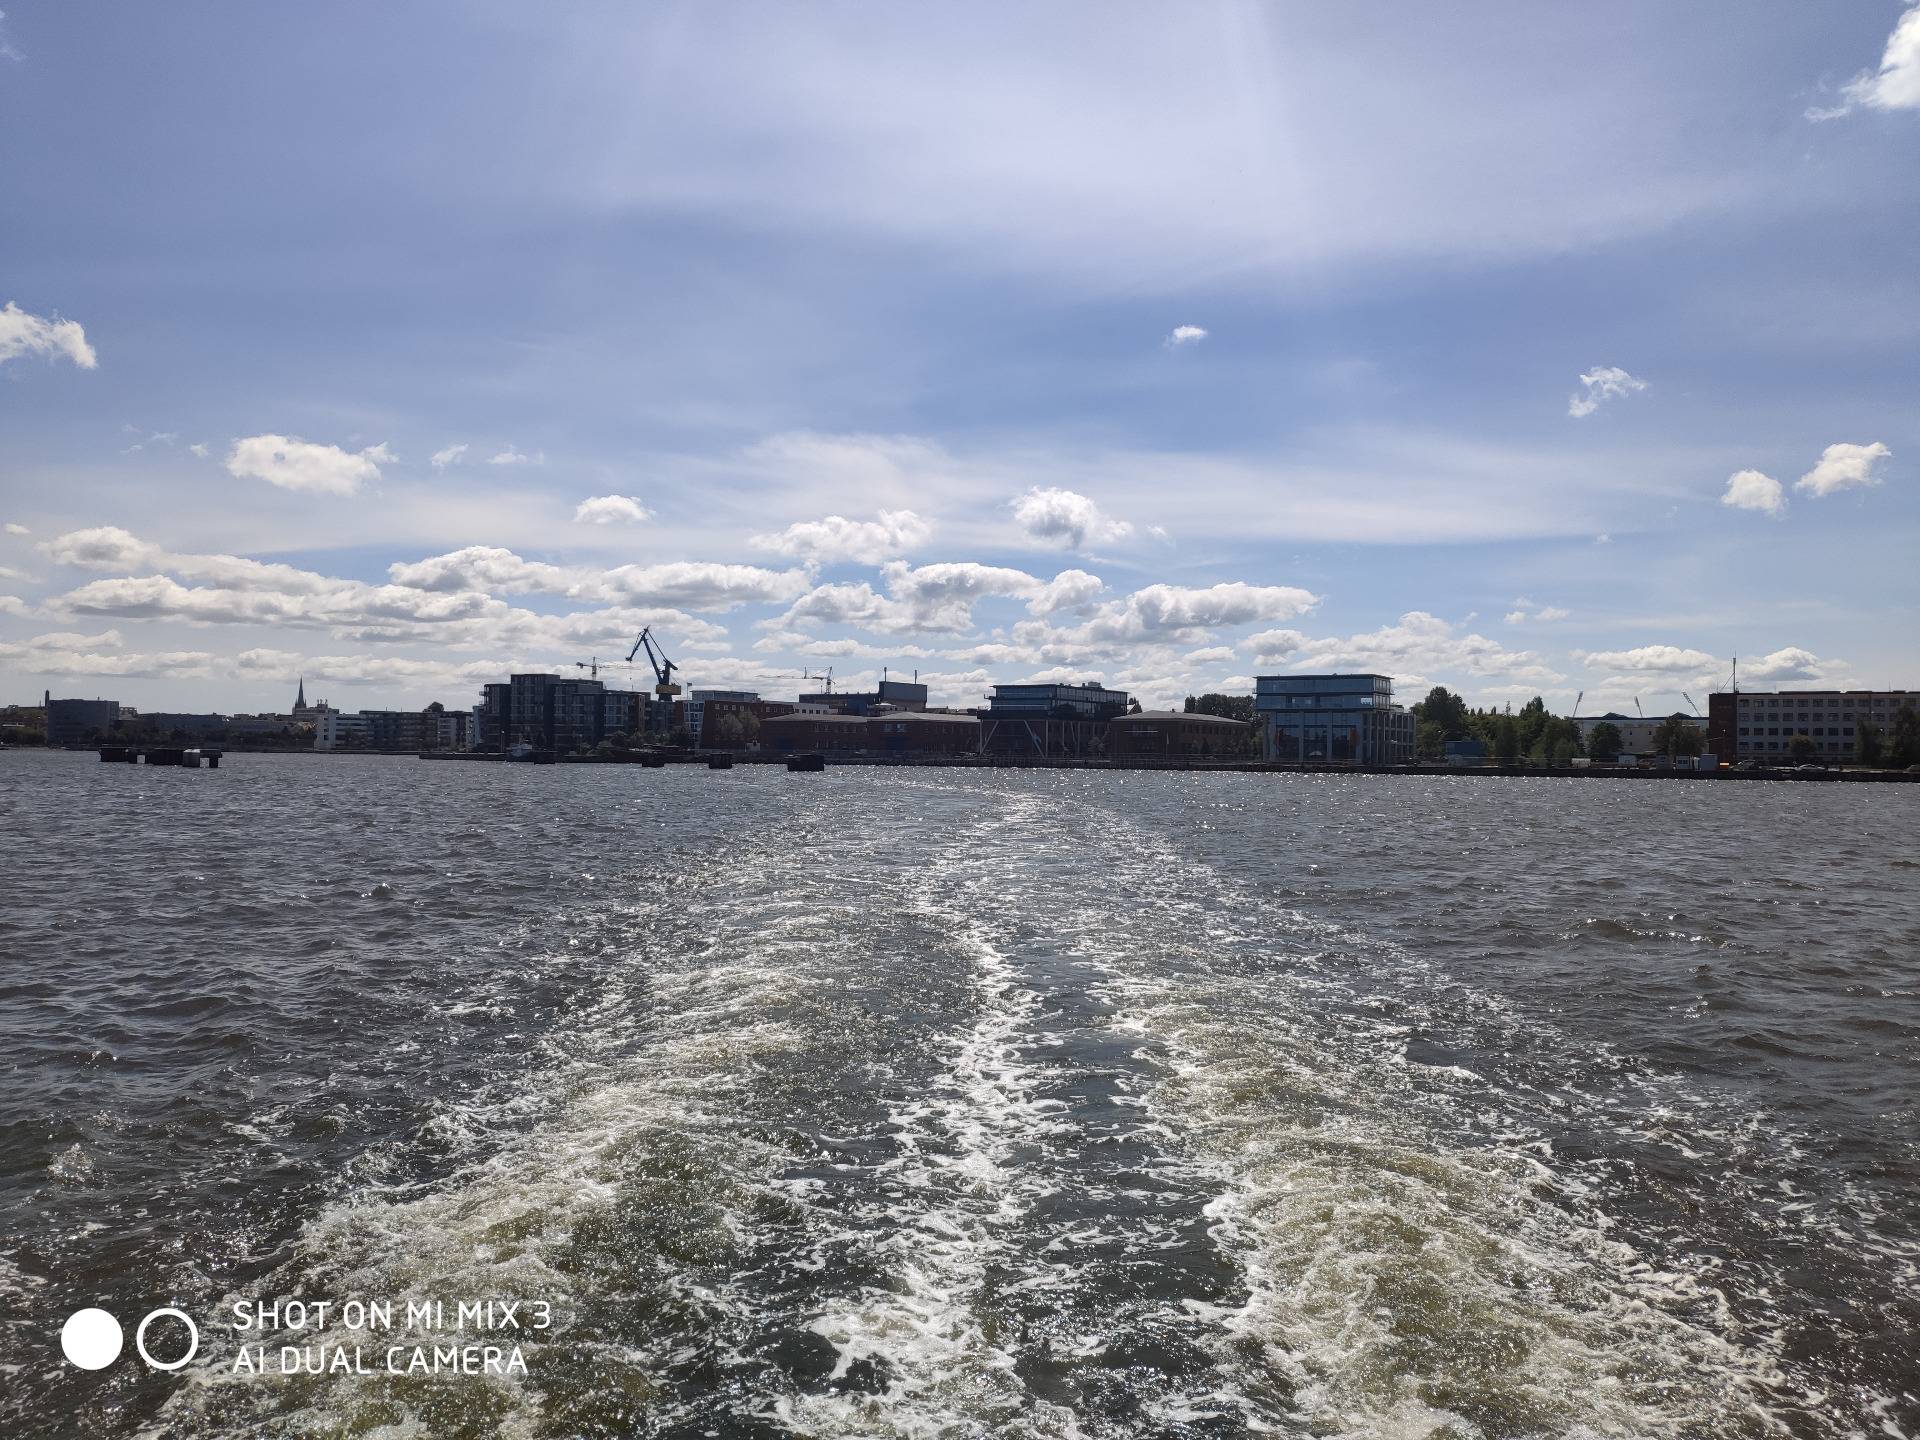 View of the skyline of Rostock from the ferry